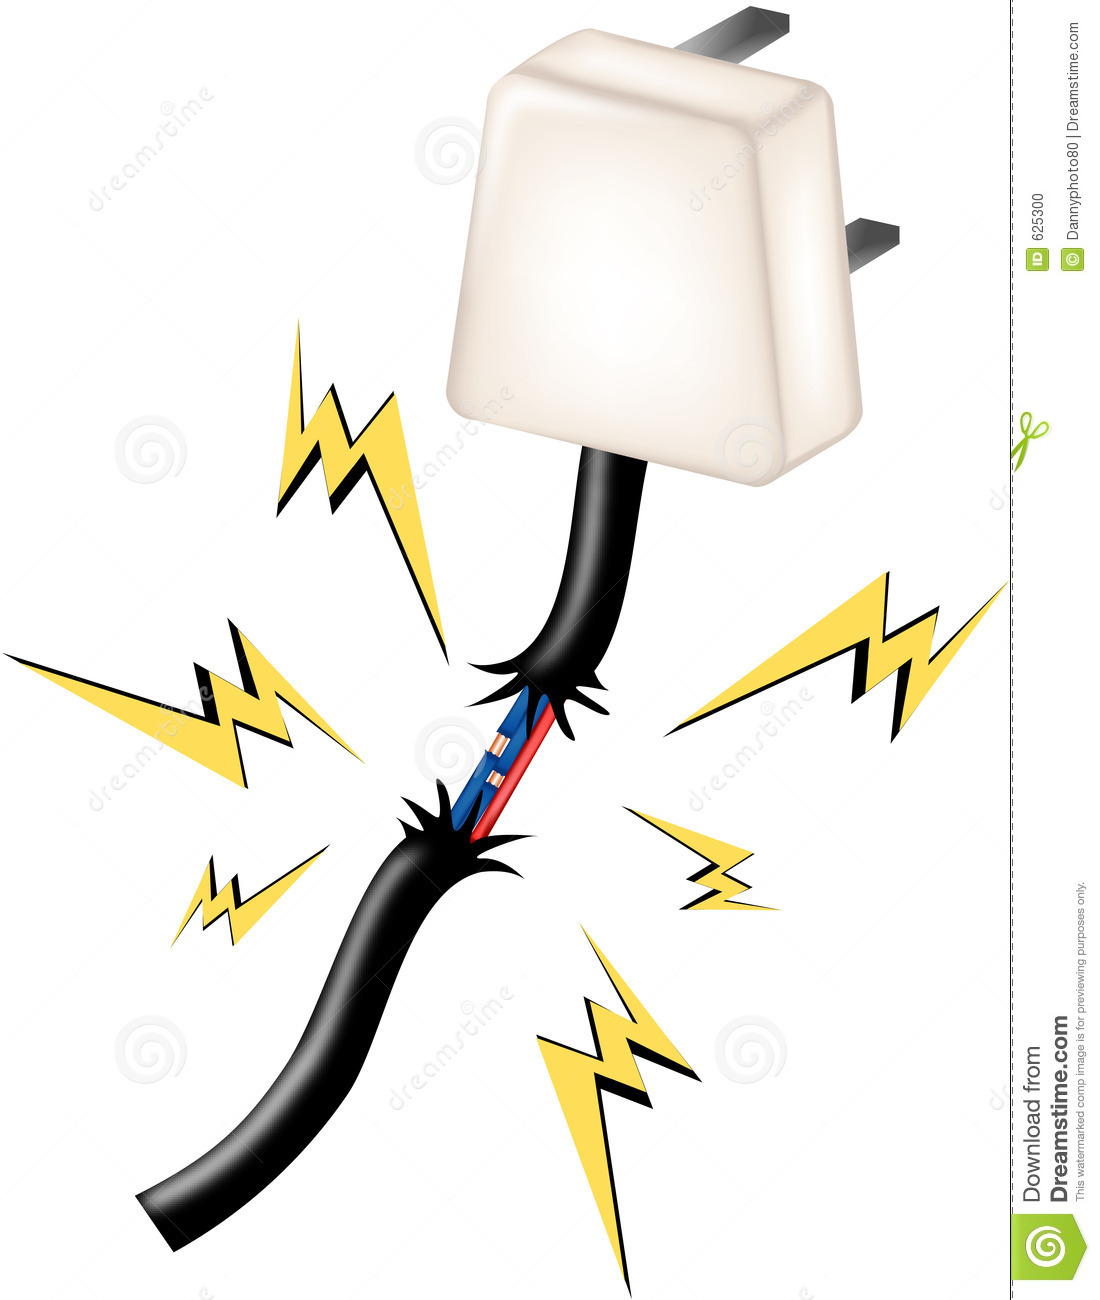 Electricity Dangers Stock Photo   Image  625300